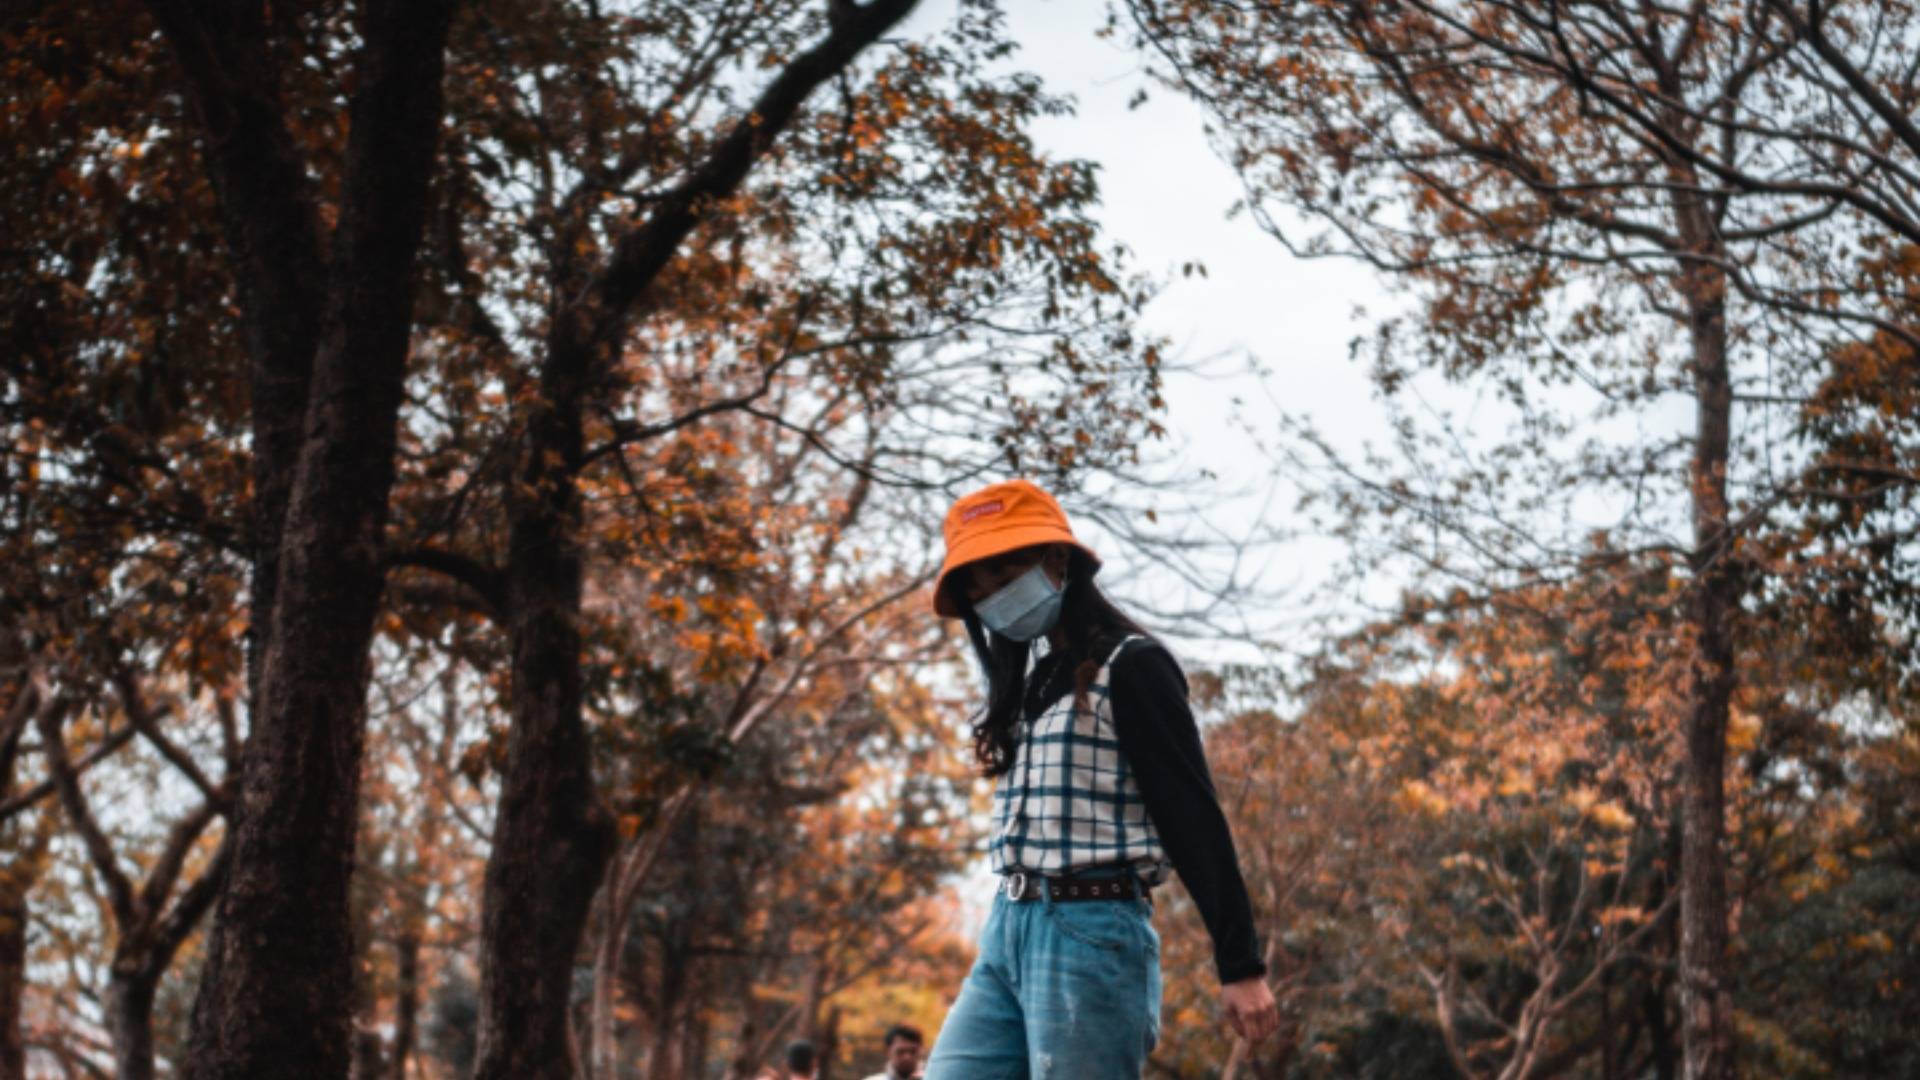 Girl in orange hat and face mask standing outdoors surrounded by autumnal foliage 